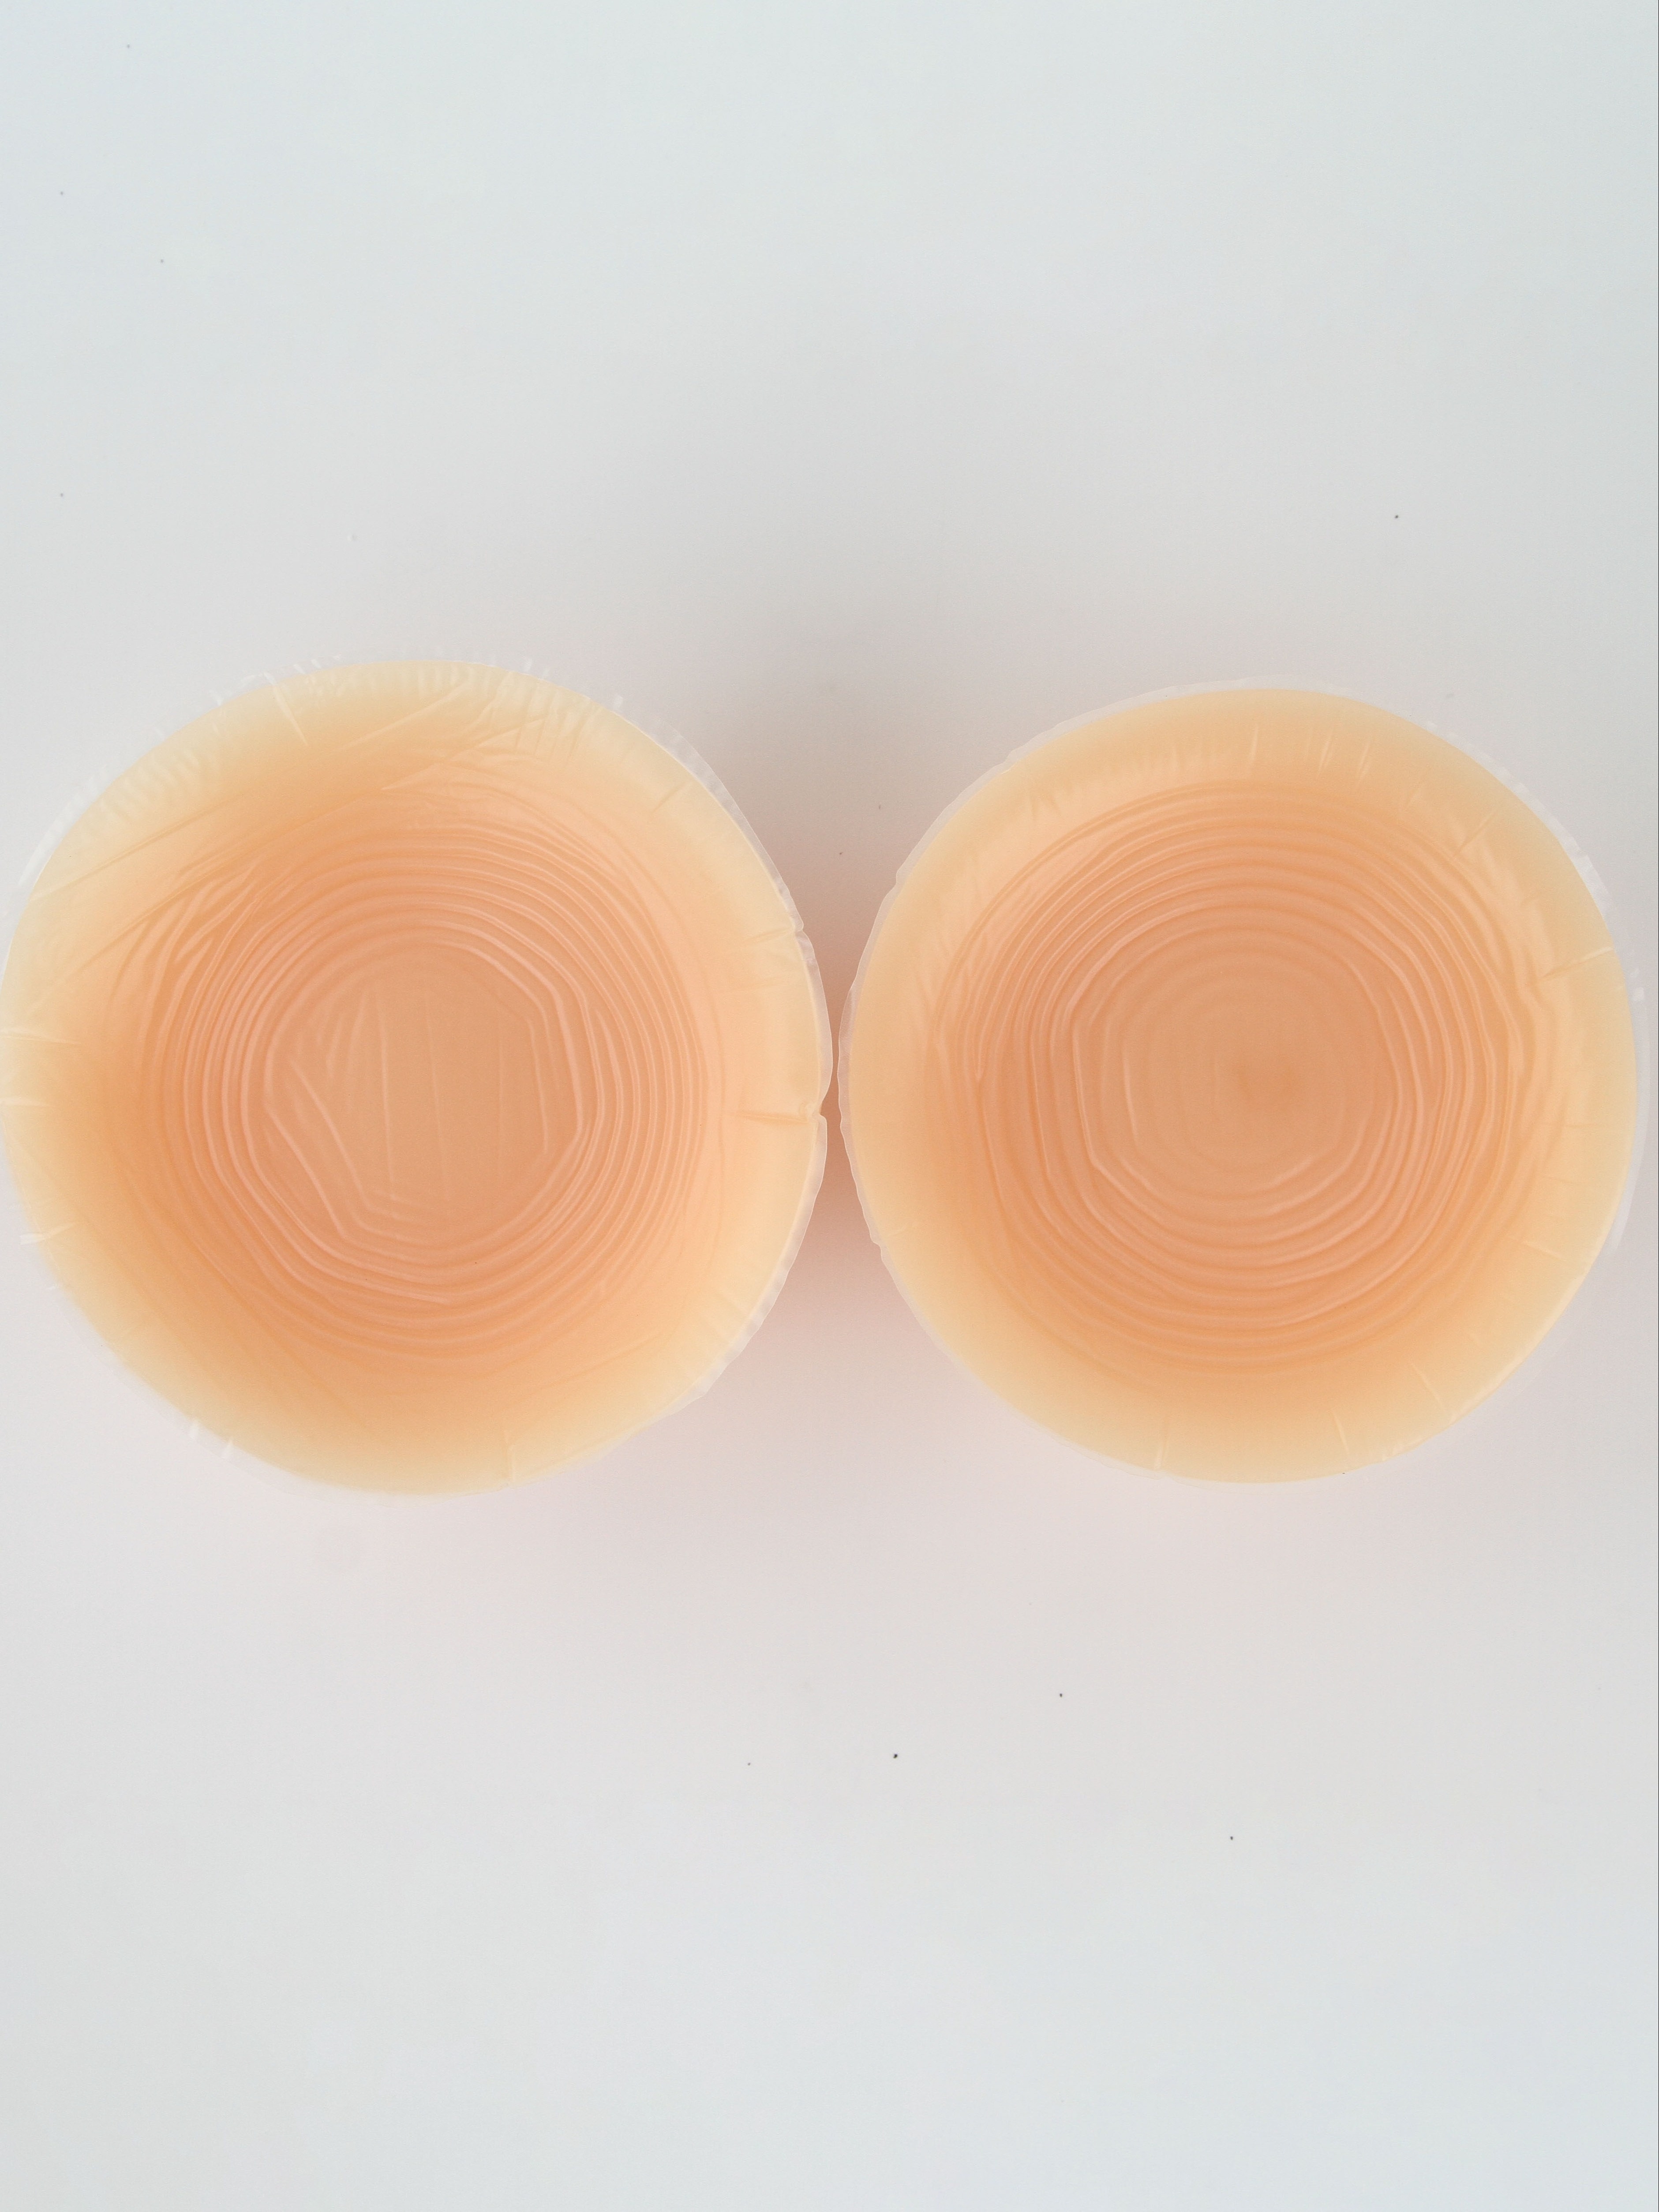 Silicone Breast Forms Mastectomy